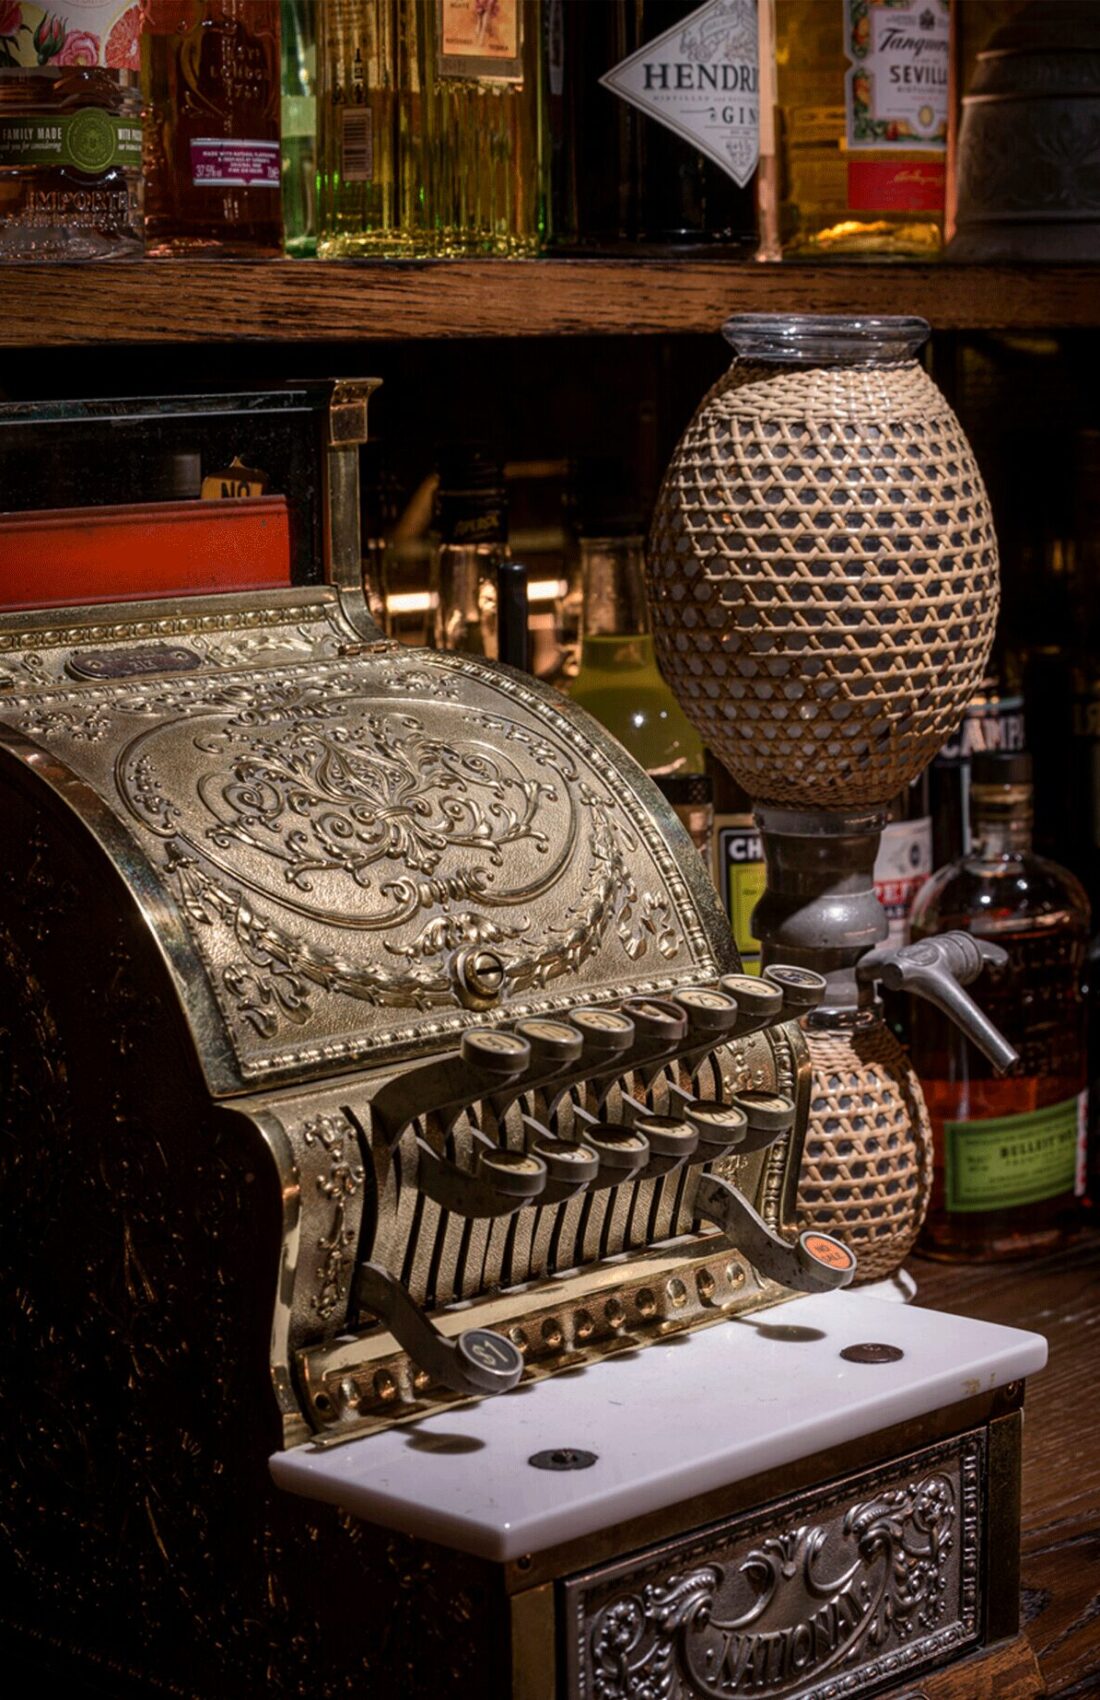 Vintage antique national typewriter used as decorative detail inside Good's Way music venue and events space in King's Cross, London, designed by 3Stories Interior Design and Branding creative agency